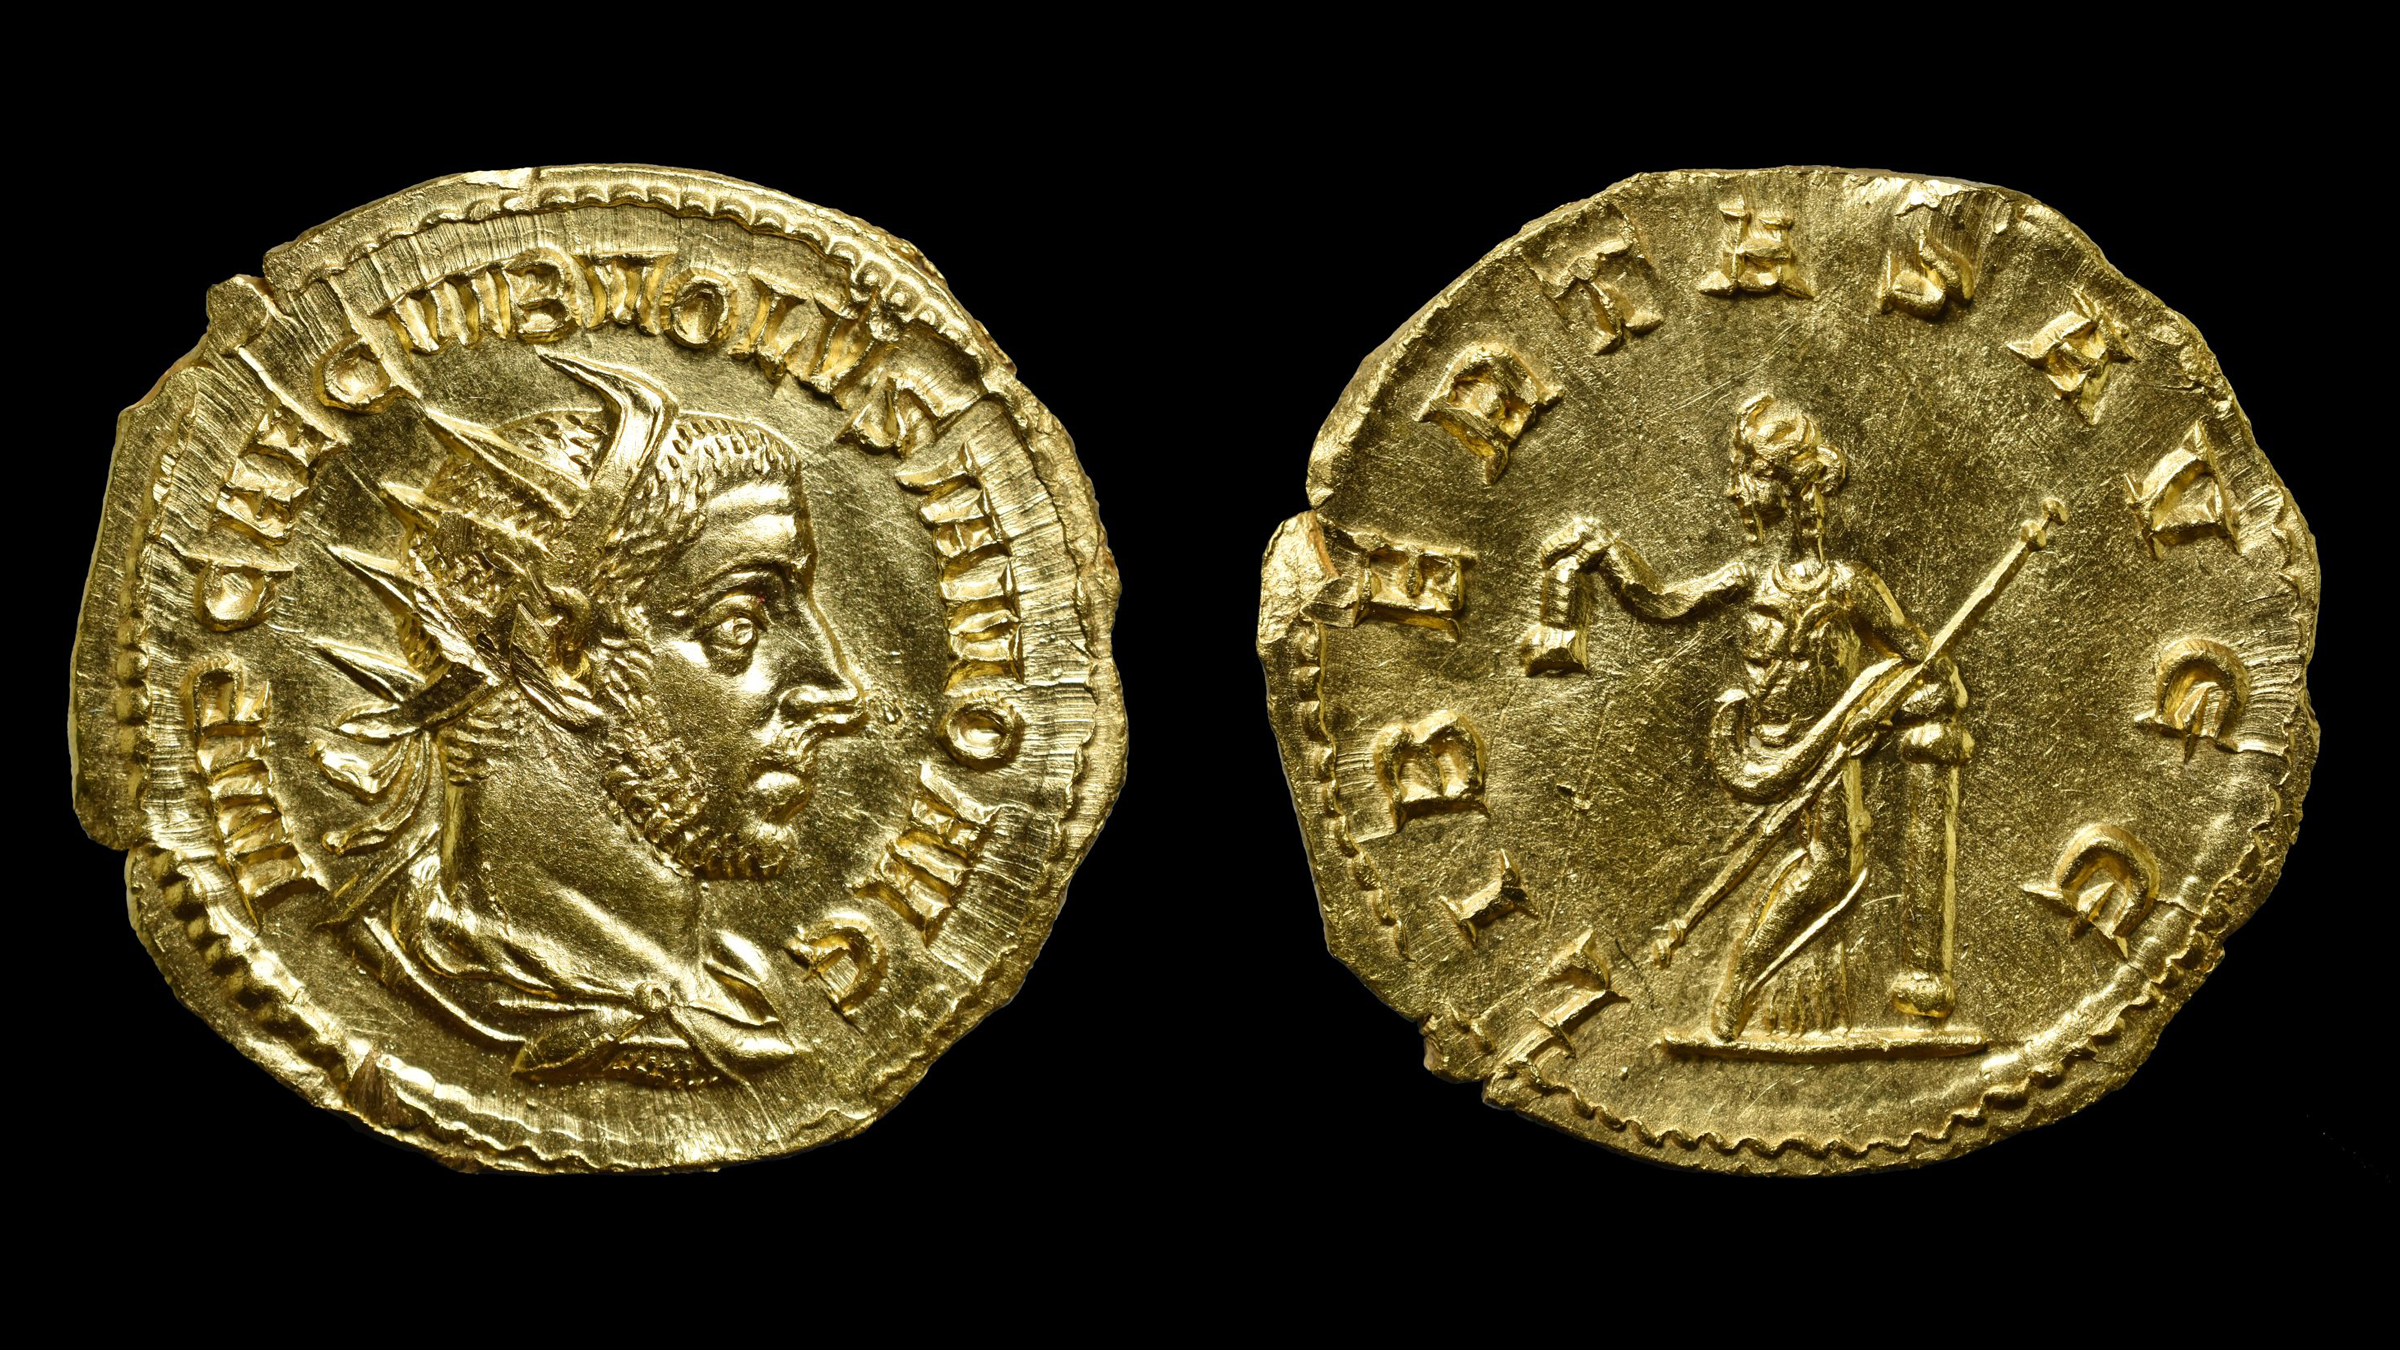 Rare gold coin found in Hungary shows assassinated Roman emperor thumbnail